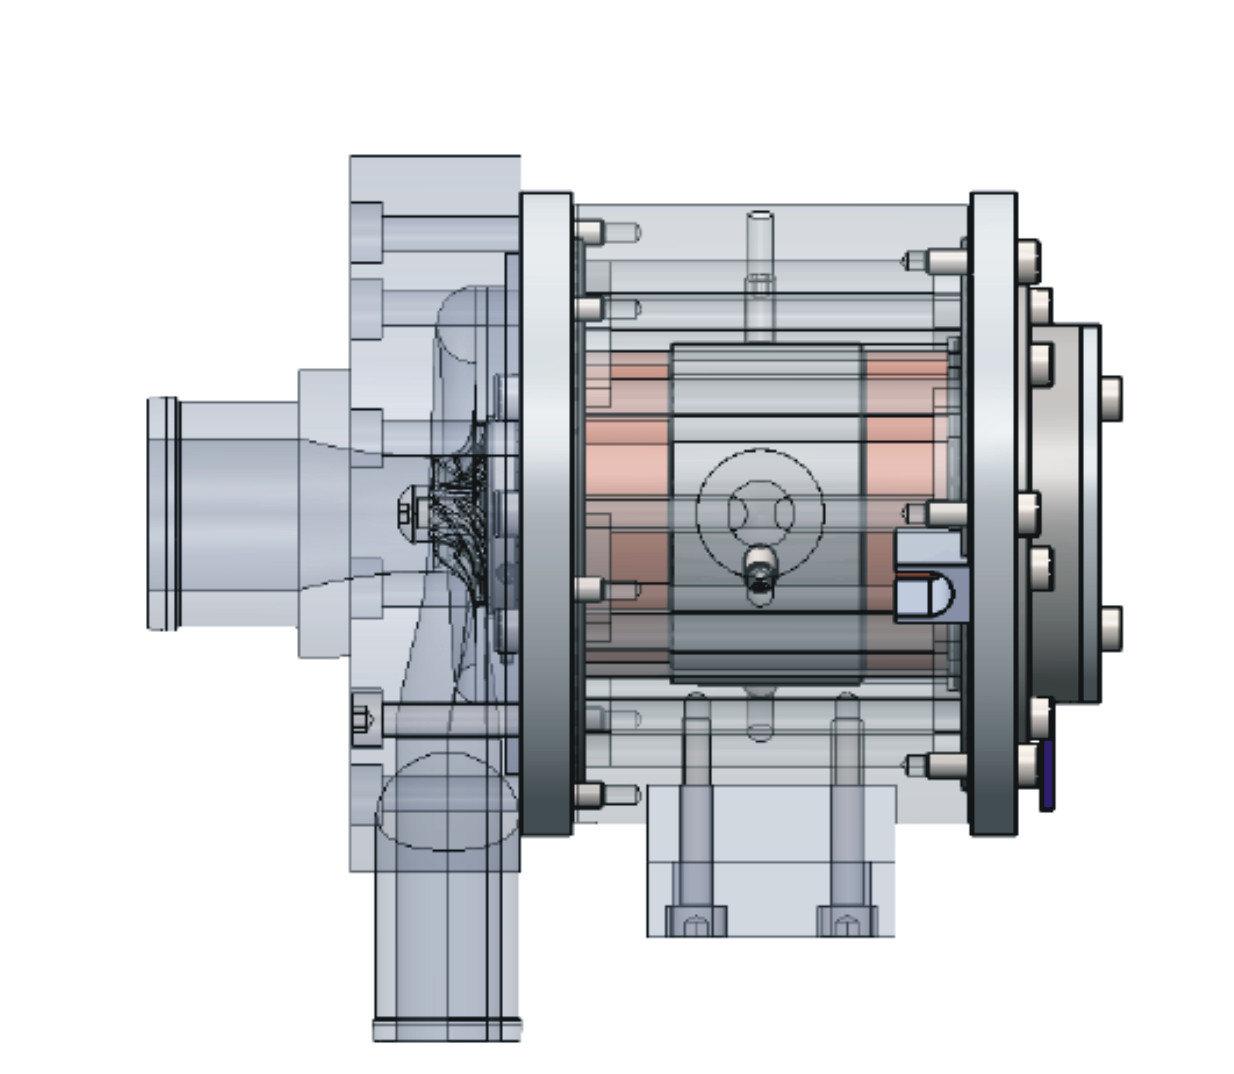 Electrical high-speed synchronous motor drive